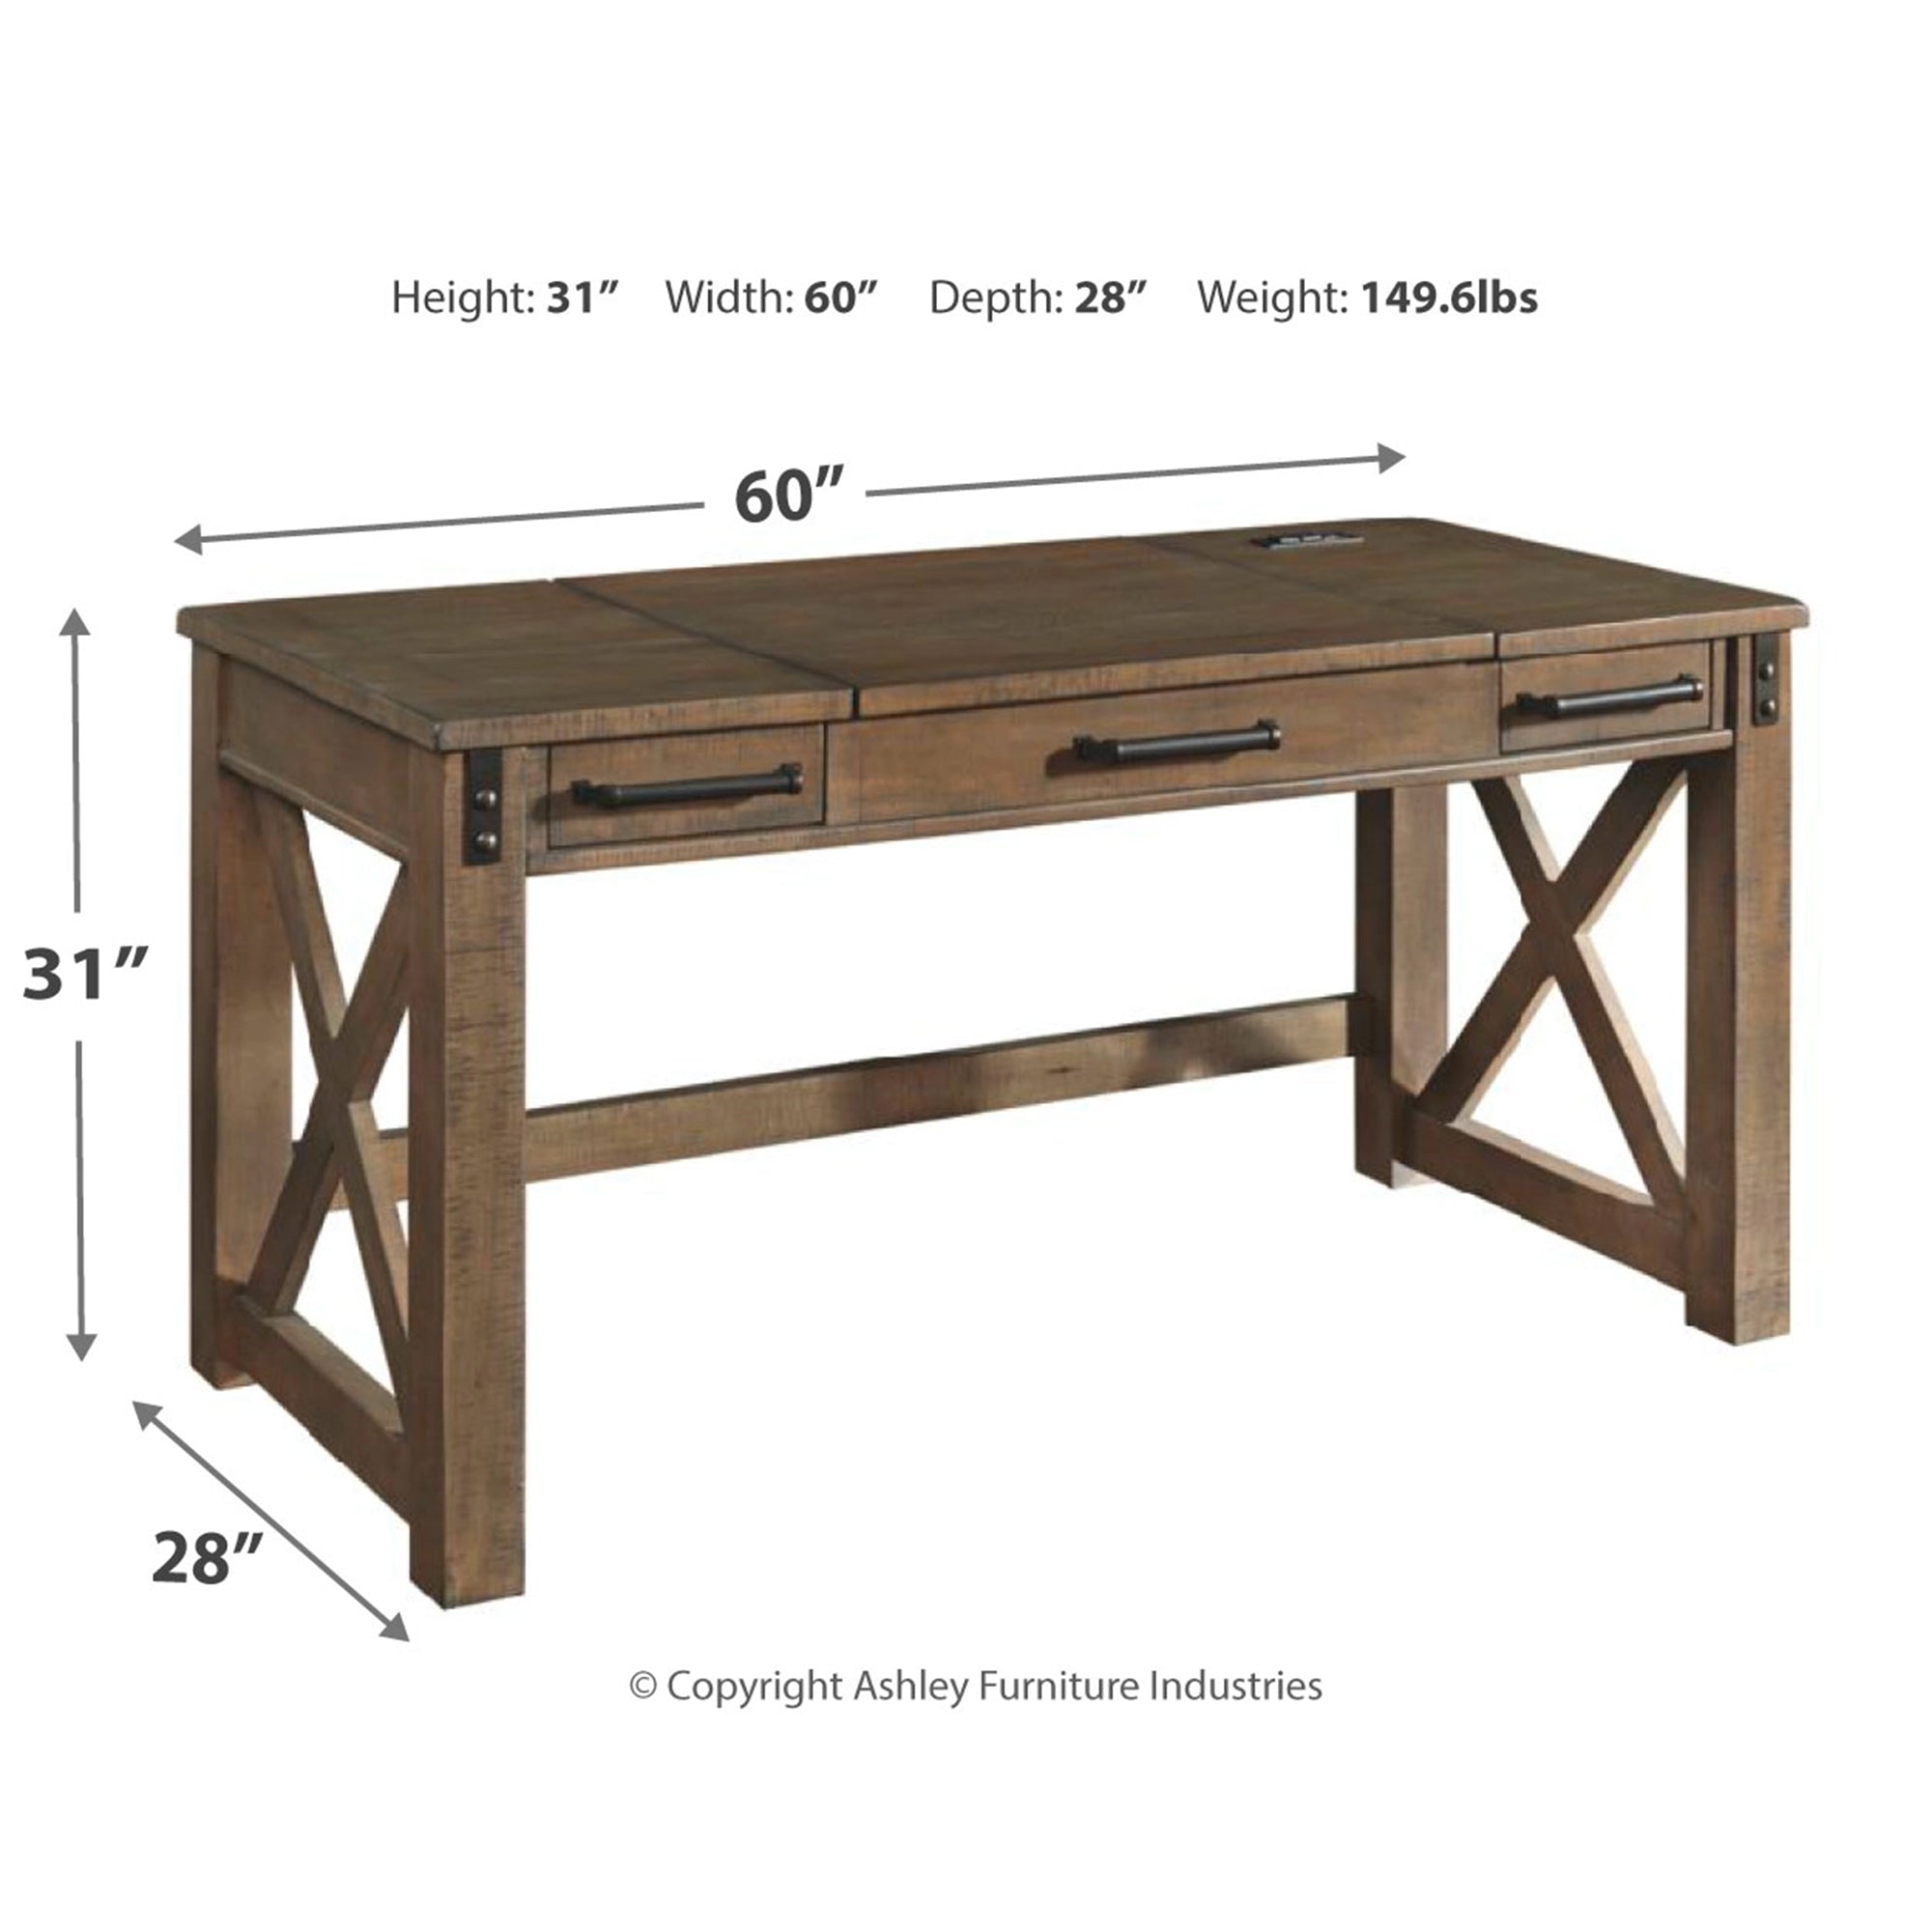 Rustic Home Office Lift Top Desk - Gray